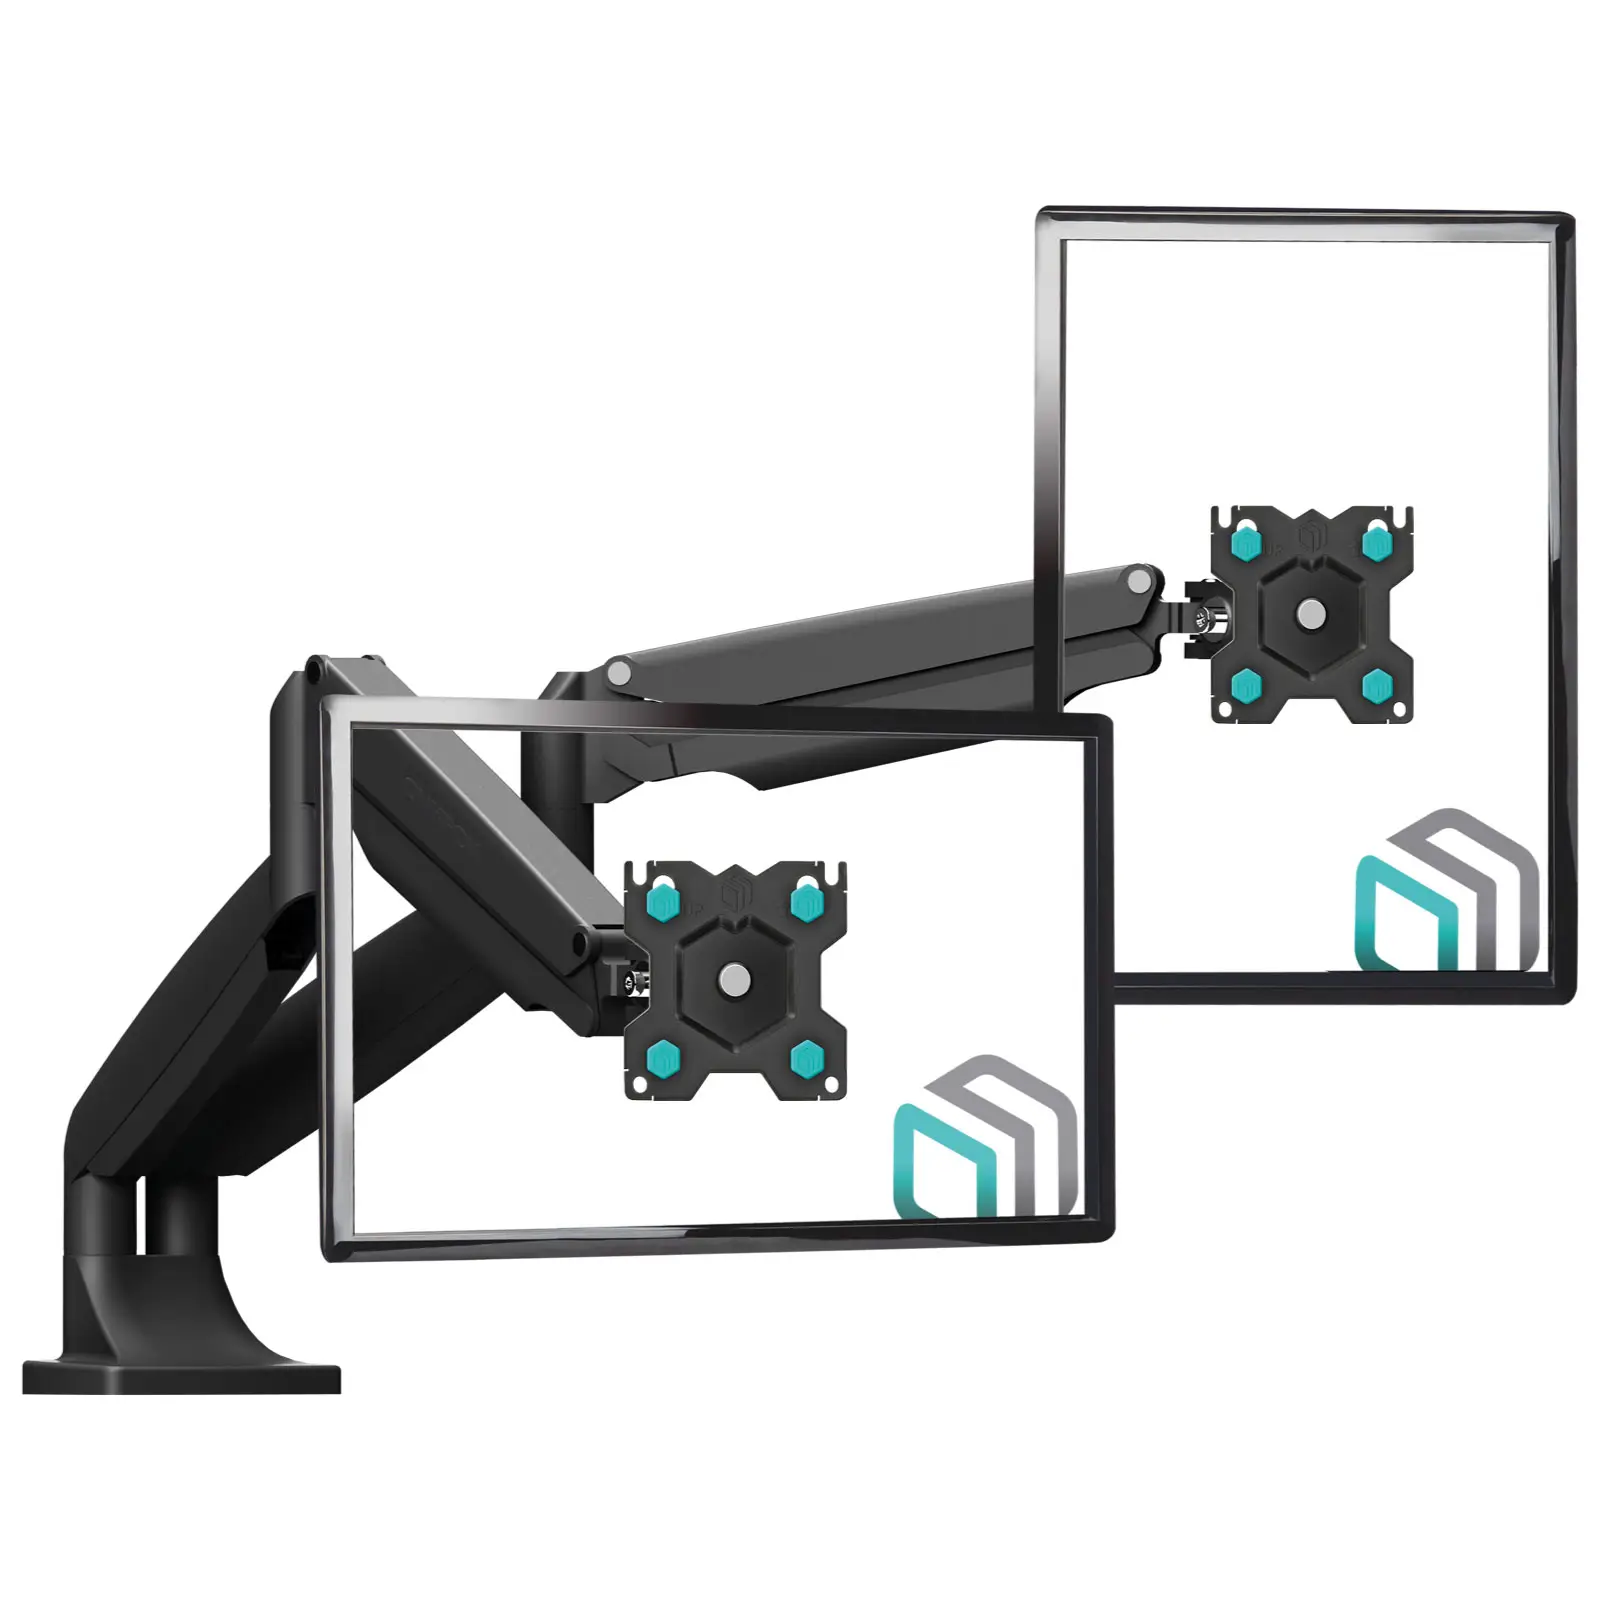 ONKRON Dual Monitor Desk Mount Stand For Two 13 - 34" LED LCD Computer Screens up to 19.8 lbs Gas Lift Mounting Arm G200 Black